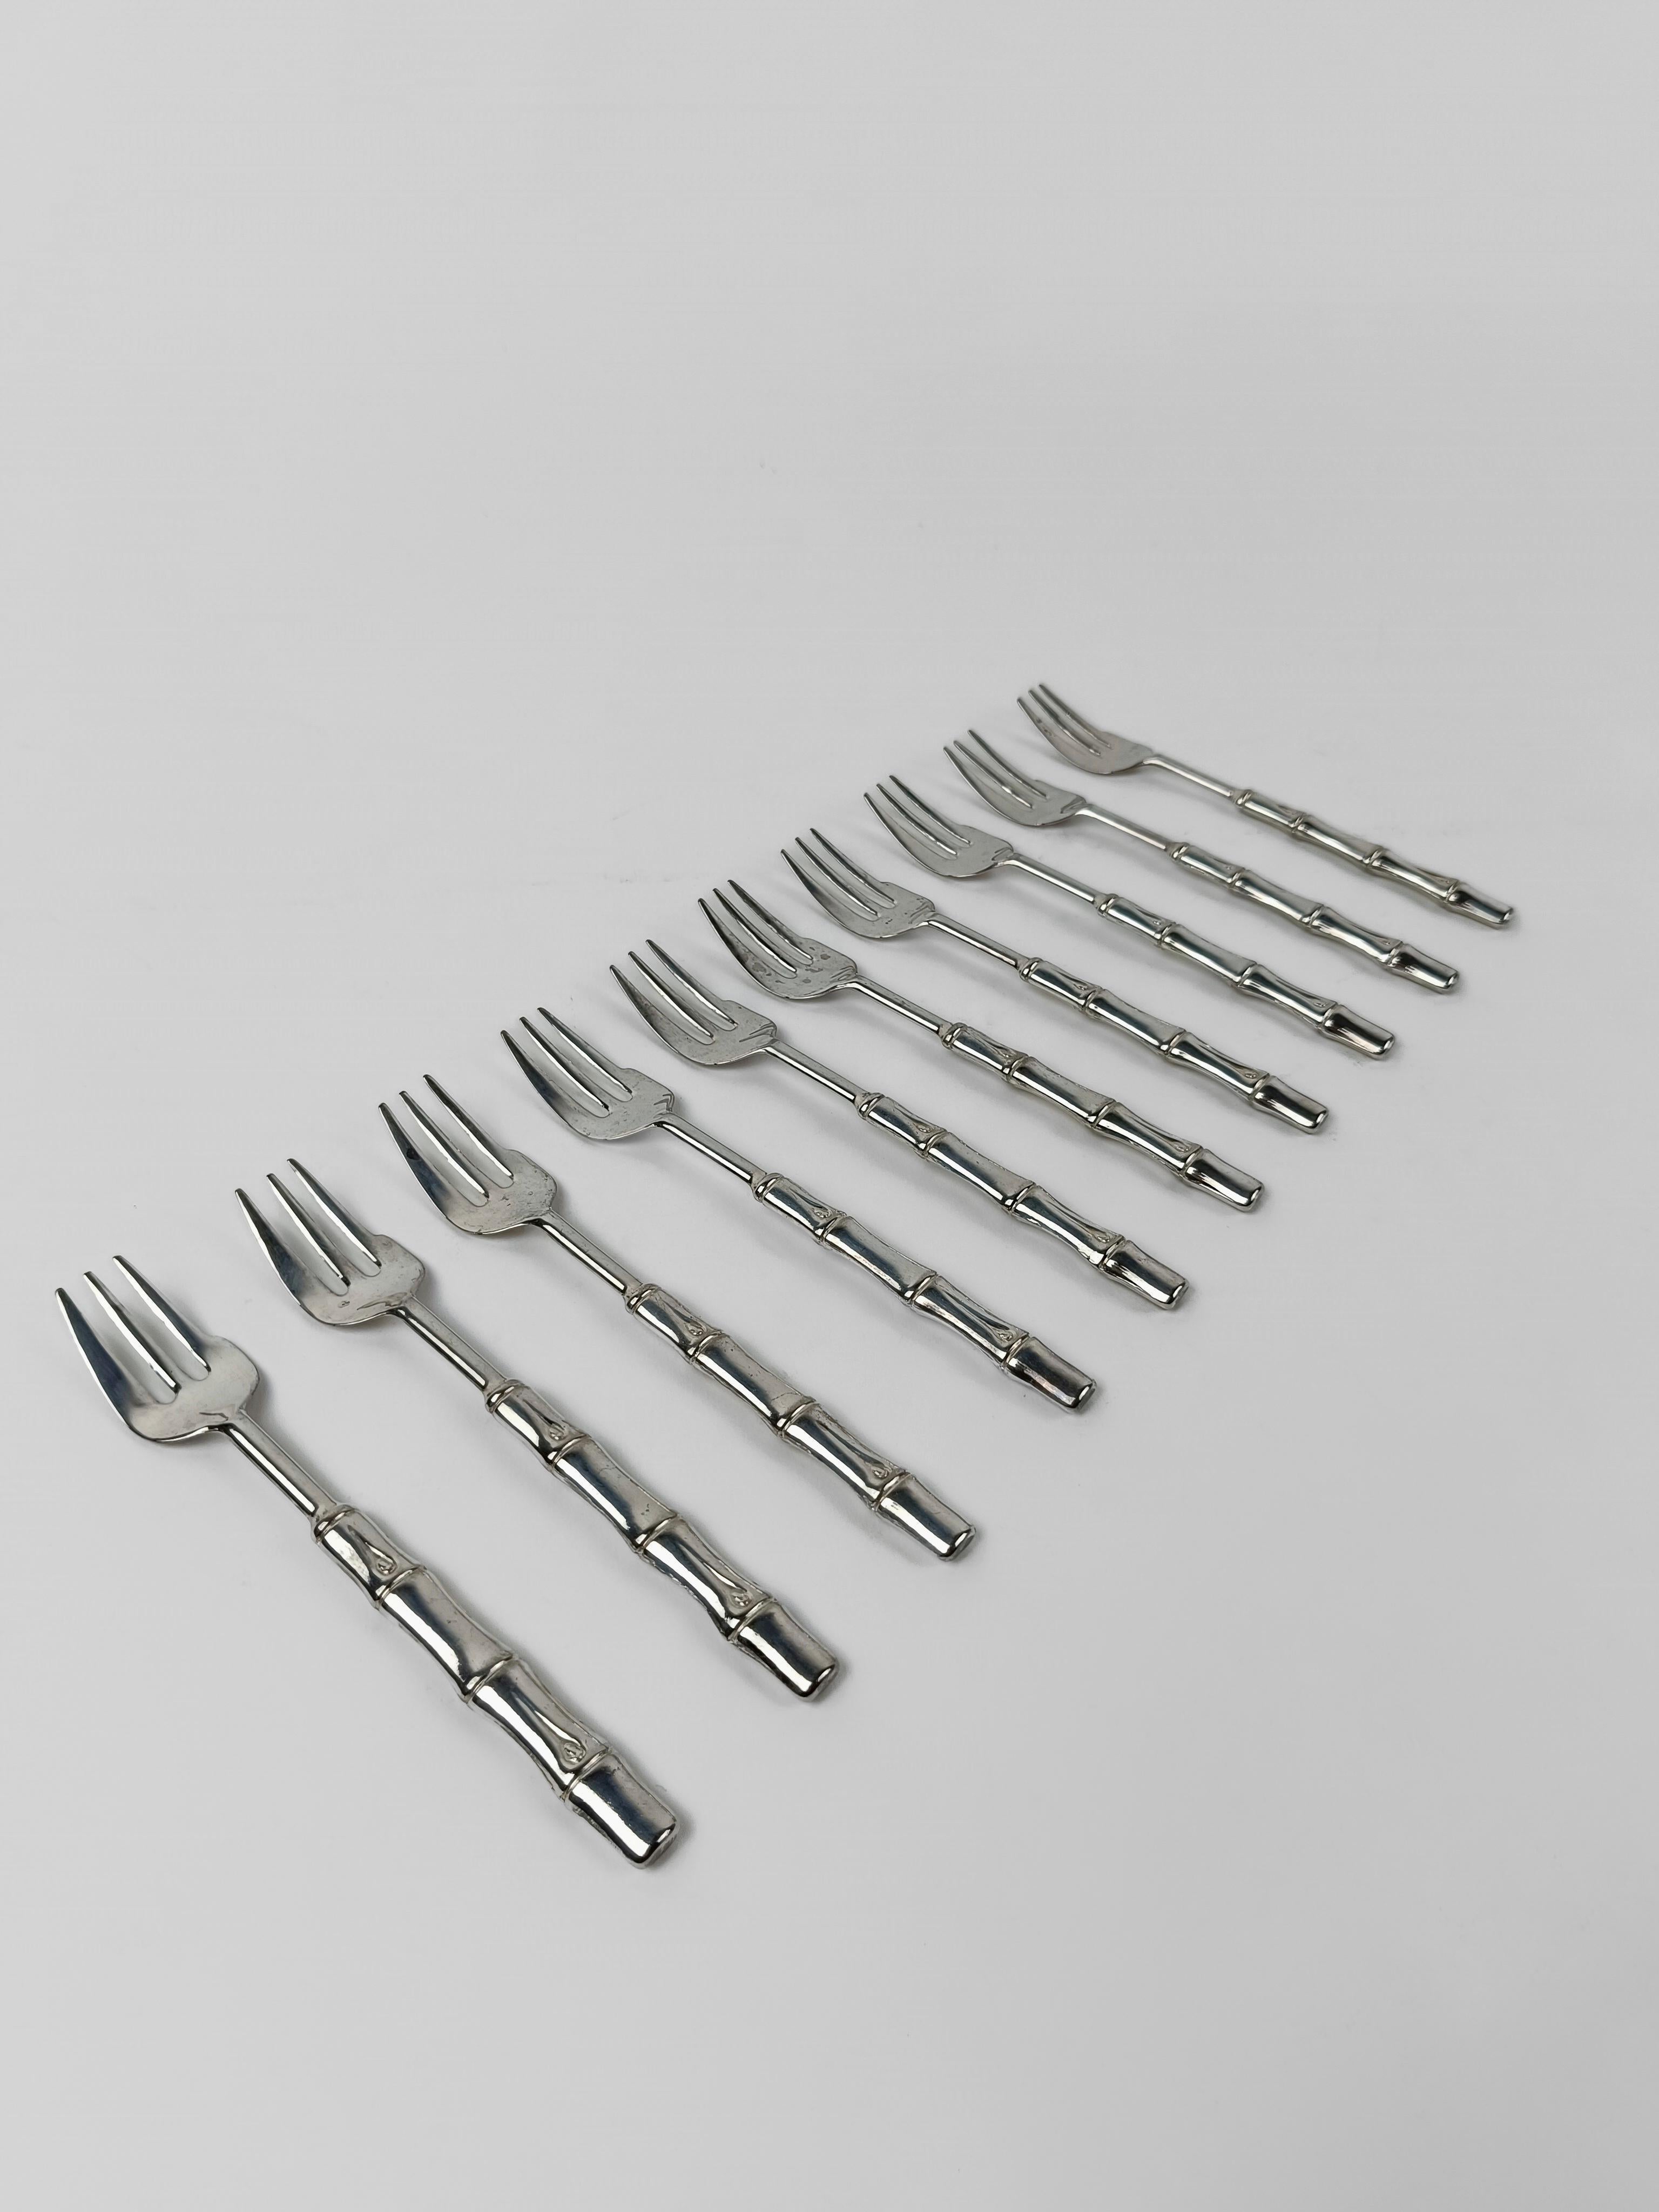 Vintage Flatware Set for 10 made in Silve Plated Faux Bamboo, Italy 1960s For Sale 11